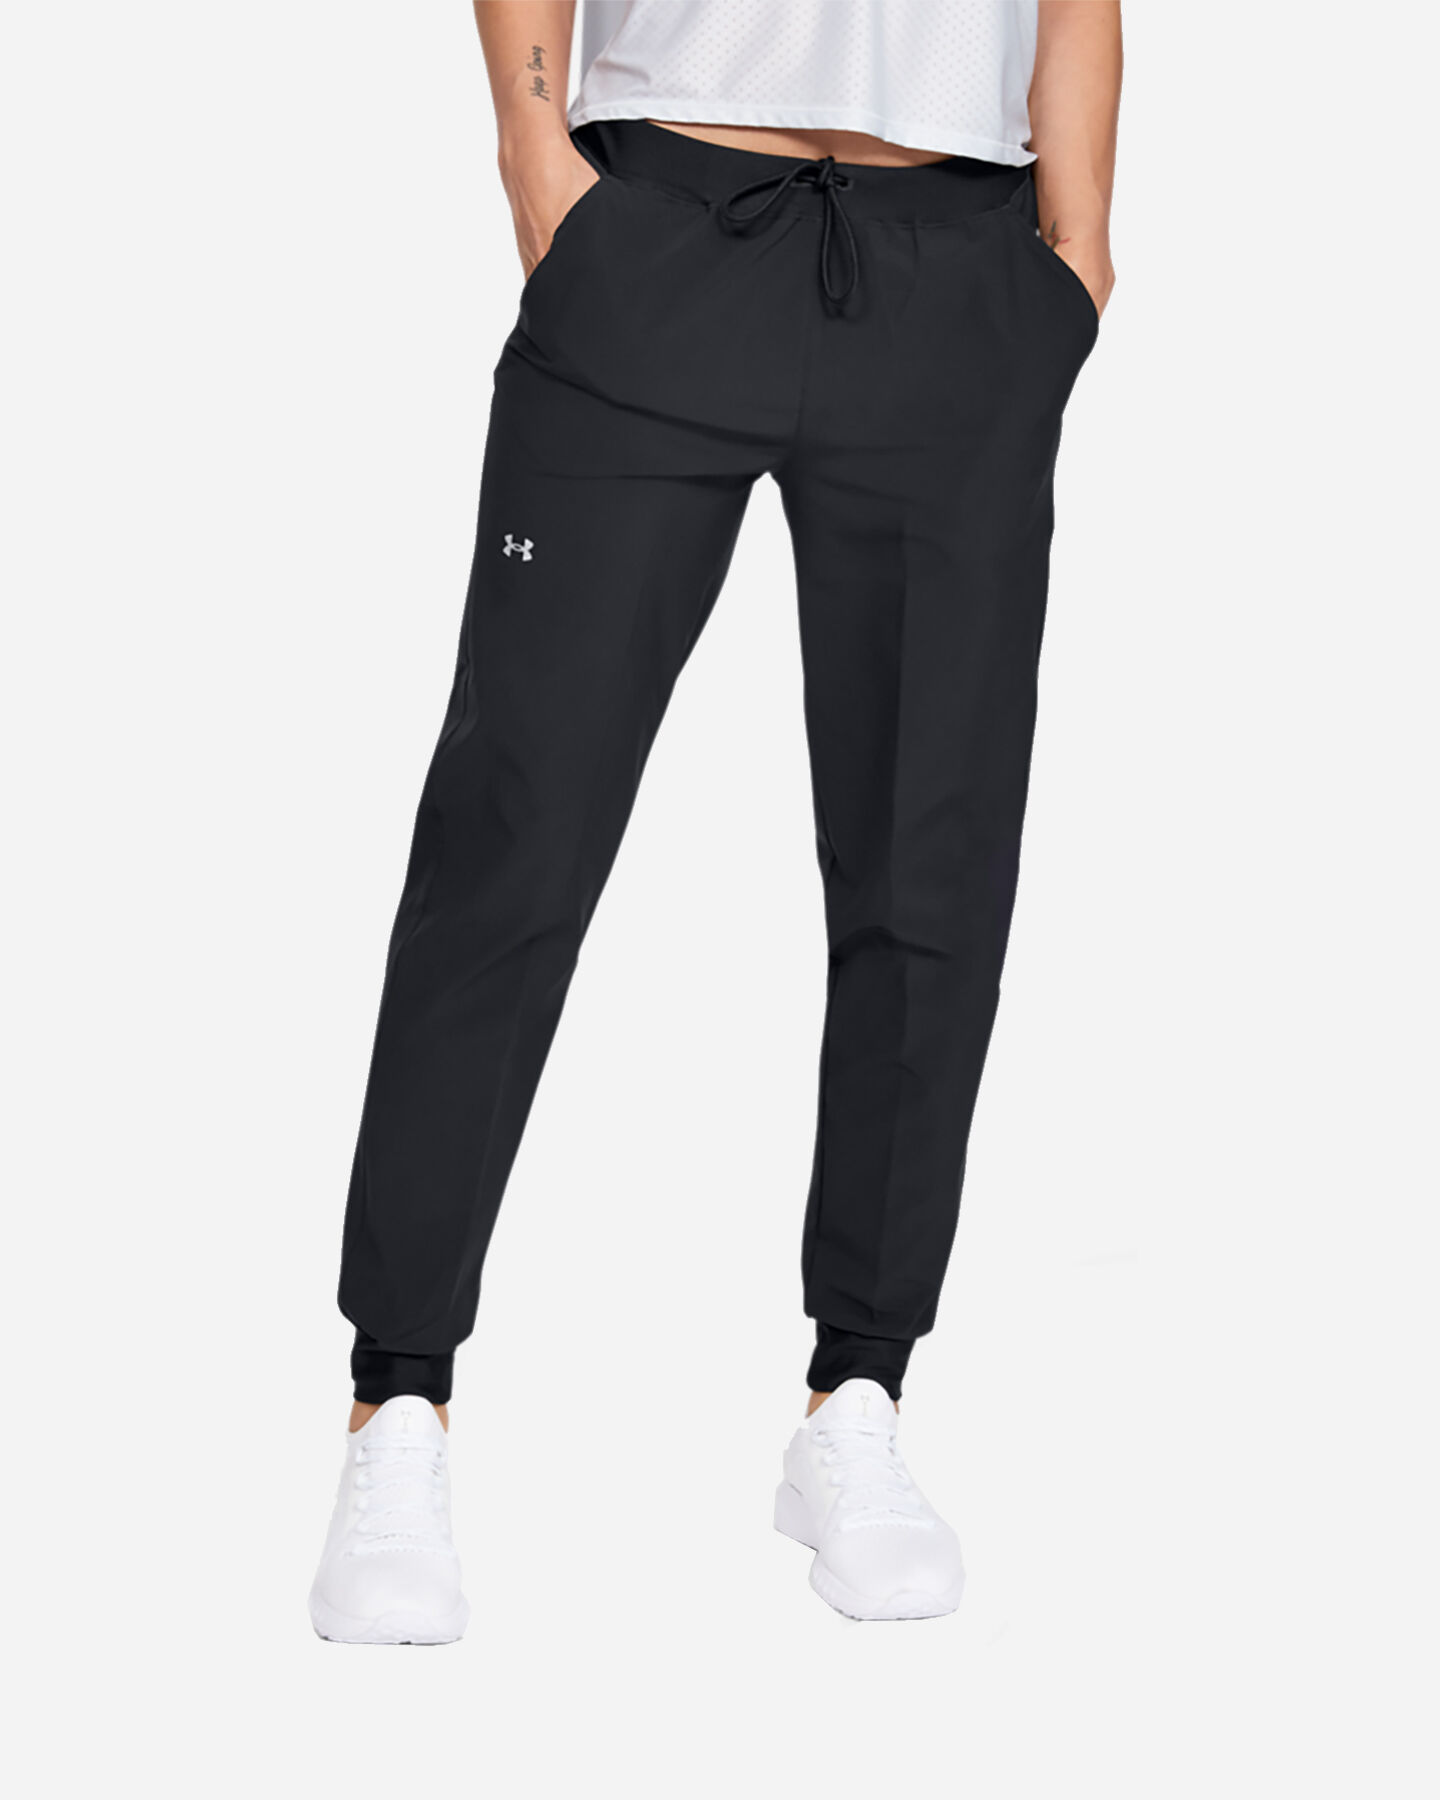  Pantalone UNDER ARMOUR WOVEN W S5168706|0001|XS scatto 0